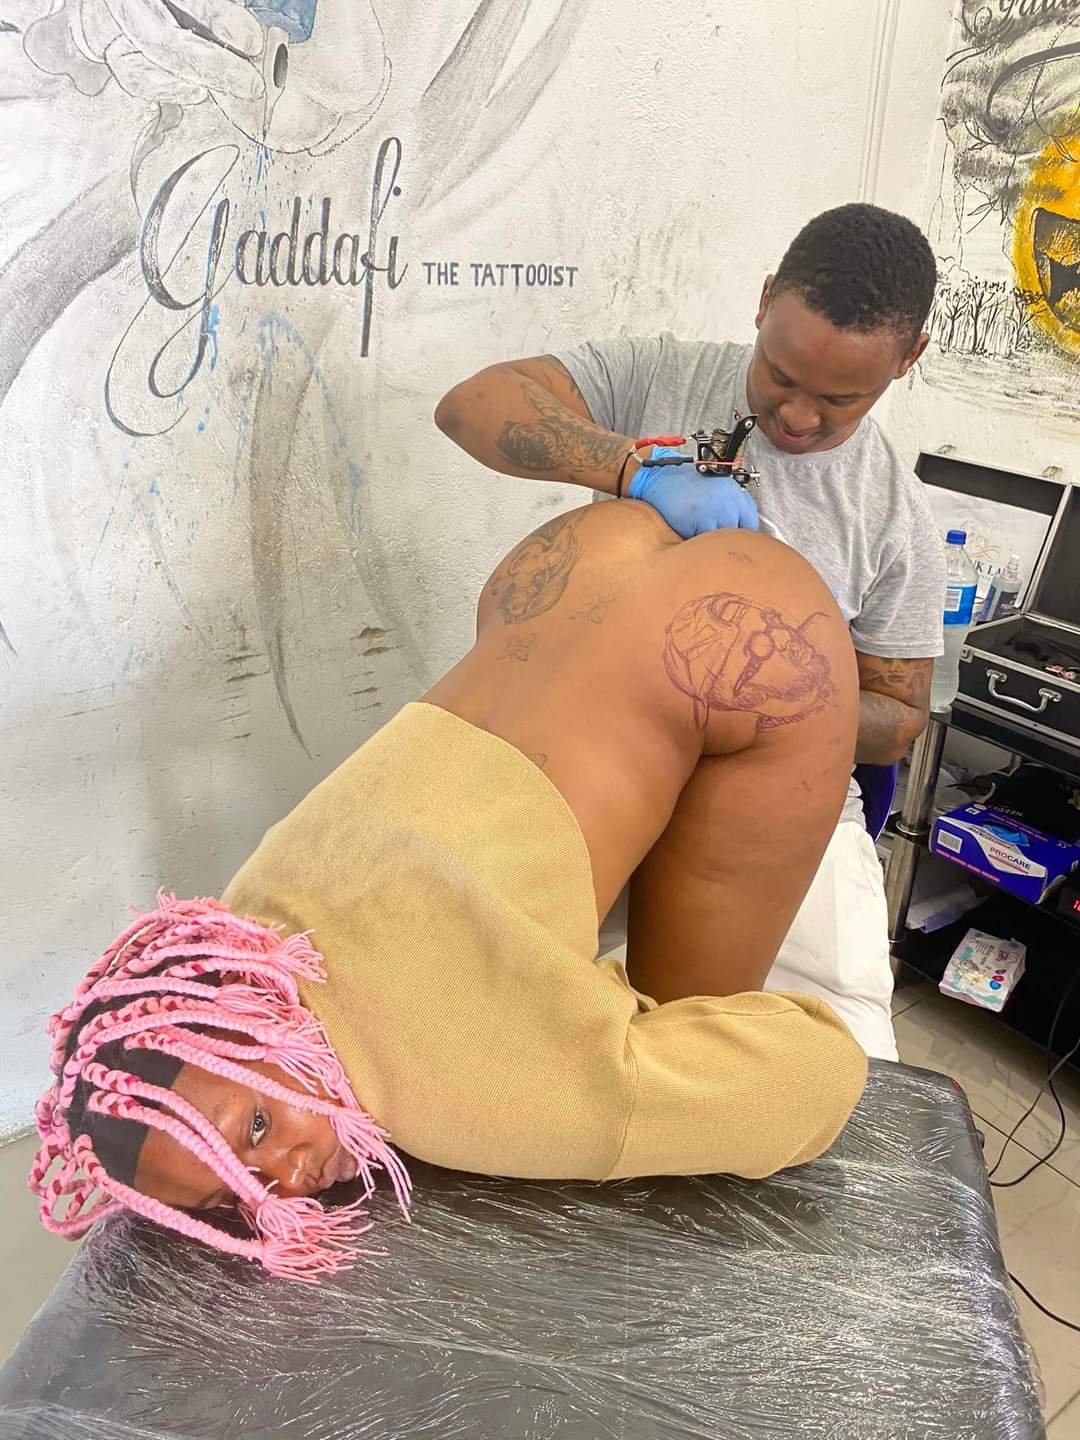 Naked Queen Sex - WATCH: Queen Minaj getting a tattoo naked - Naughty ZA